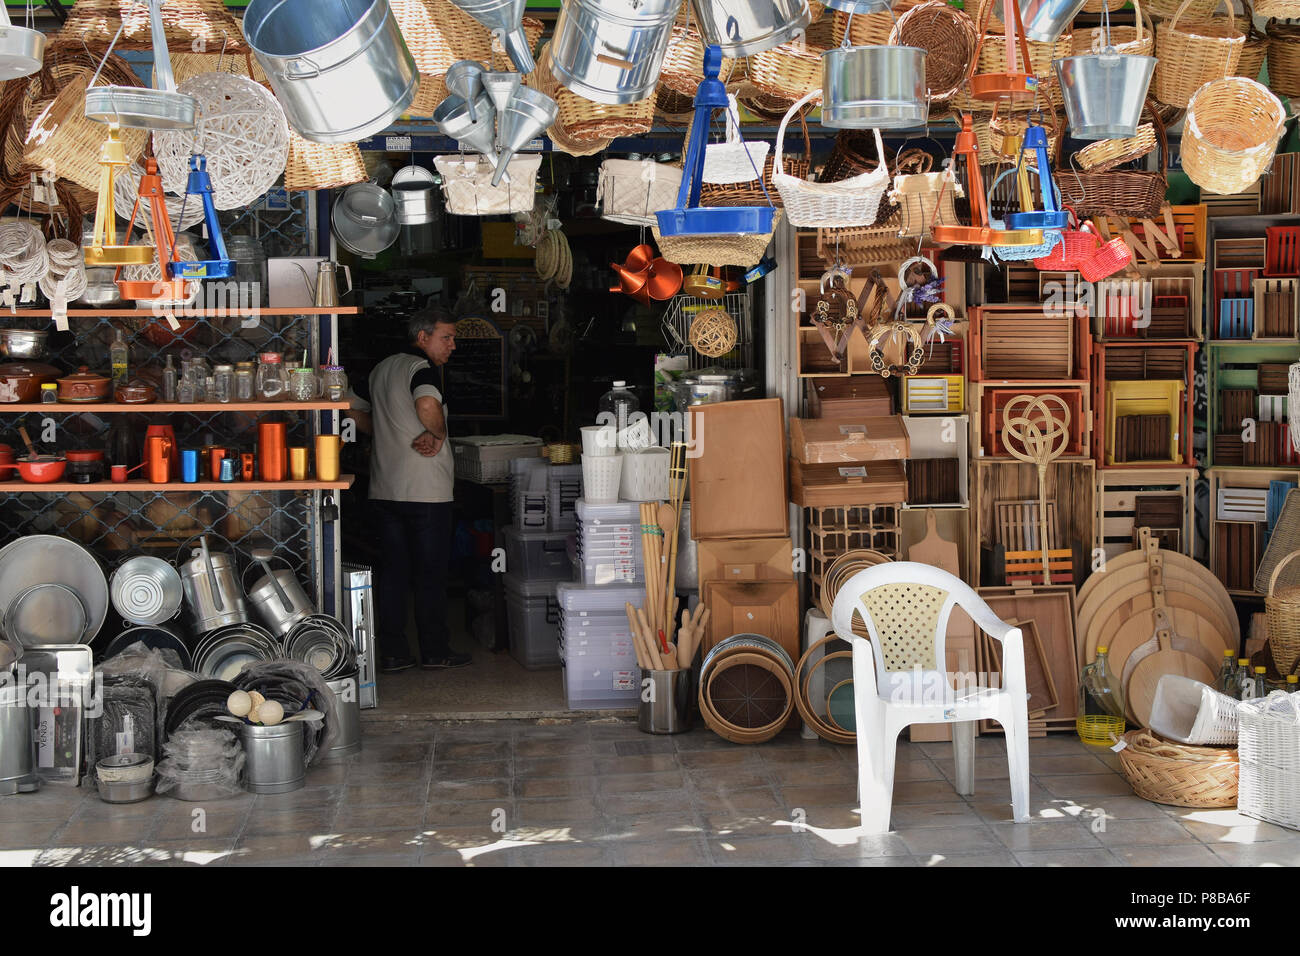 https://c8.alamy.com/comp/P8BA6F/athens-greece-july-4-2018-man-in-traditional-housewares-store-in-downtown-athens-P8BA6F.jpg